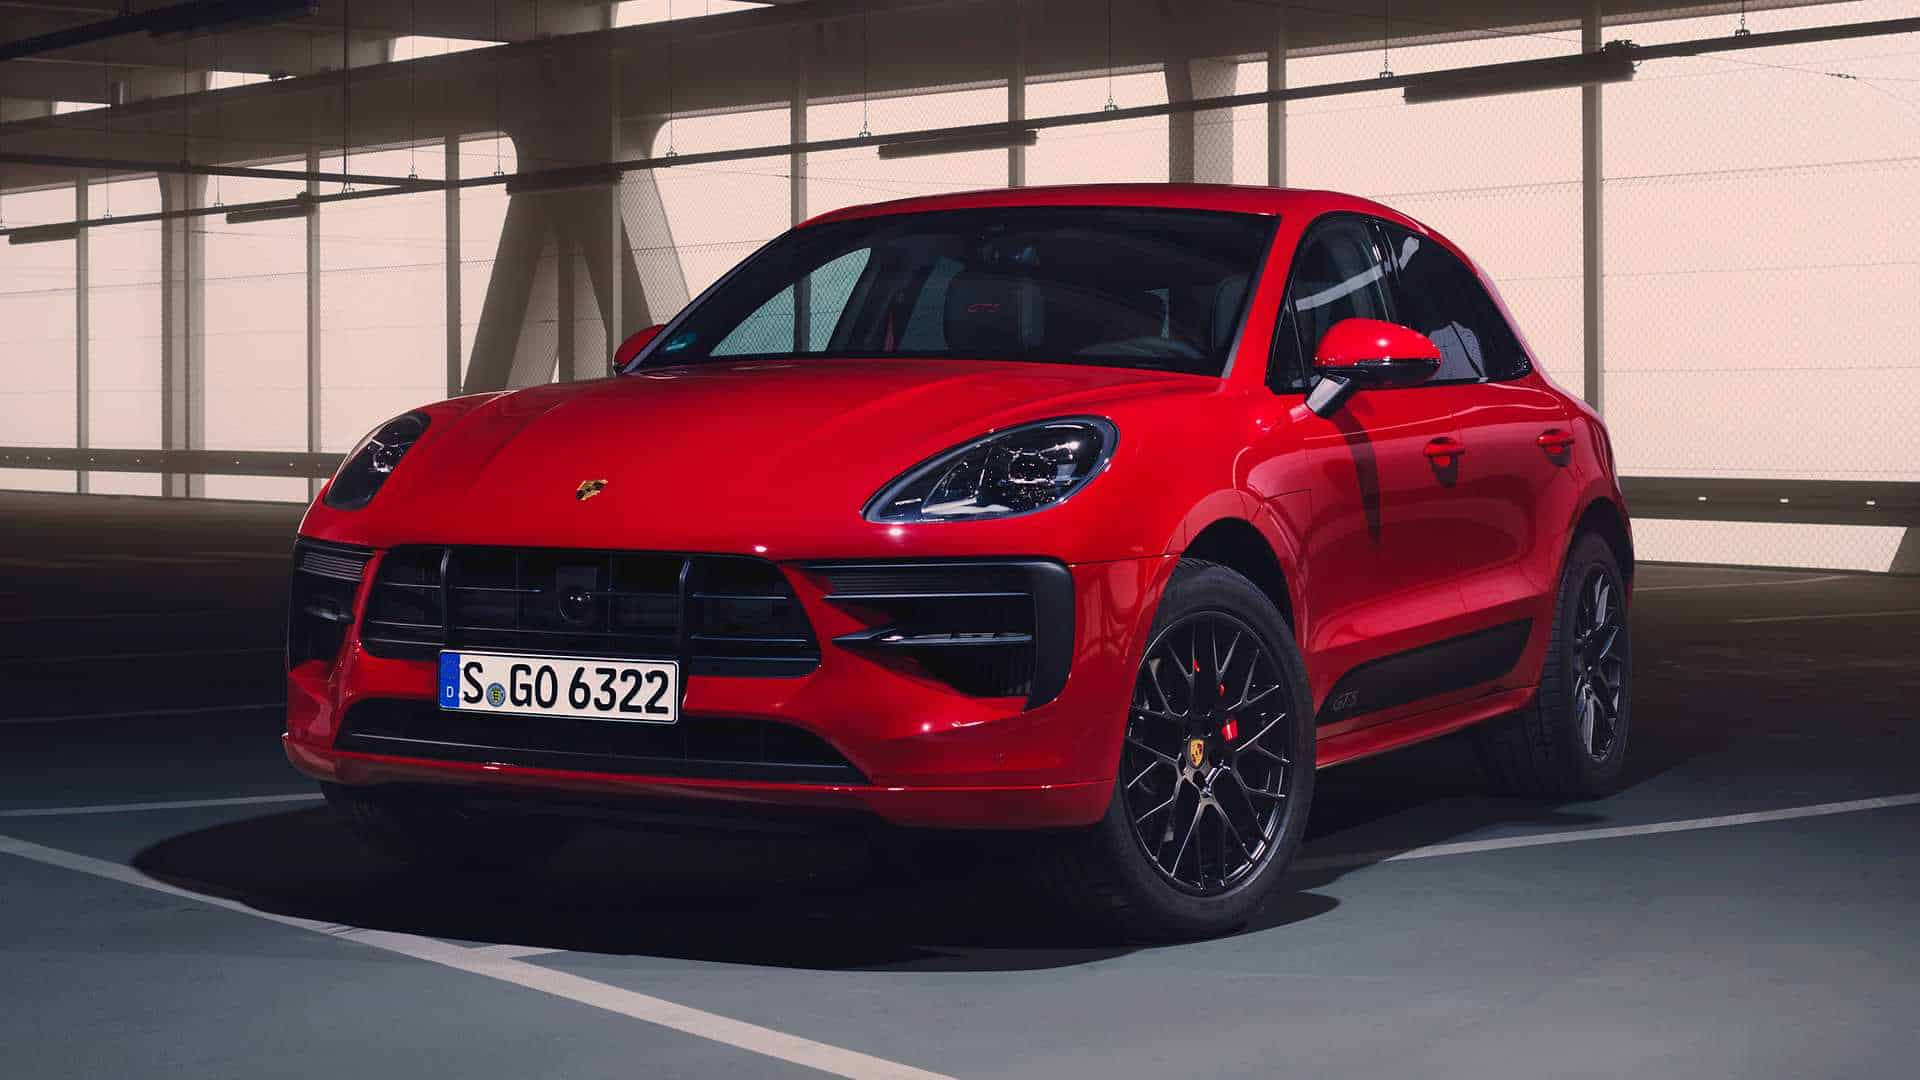 The Brand New Porsche Macan GTS is Simply Incredible